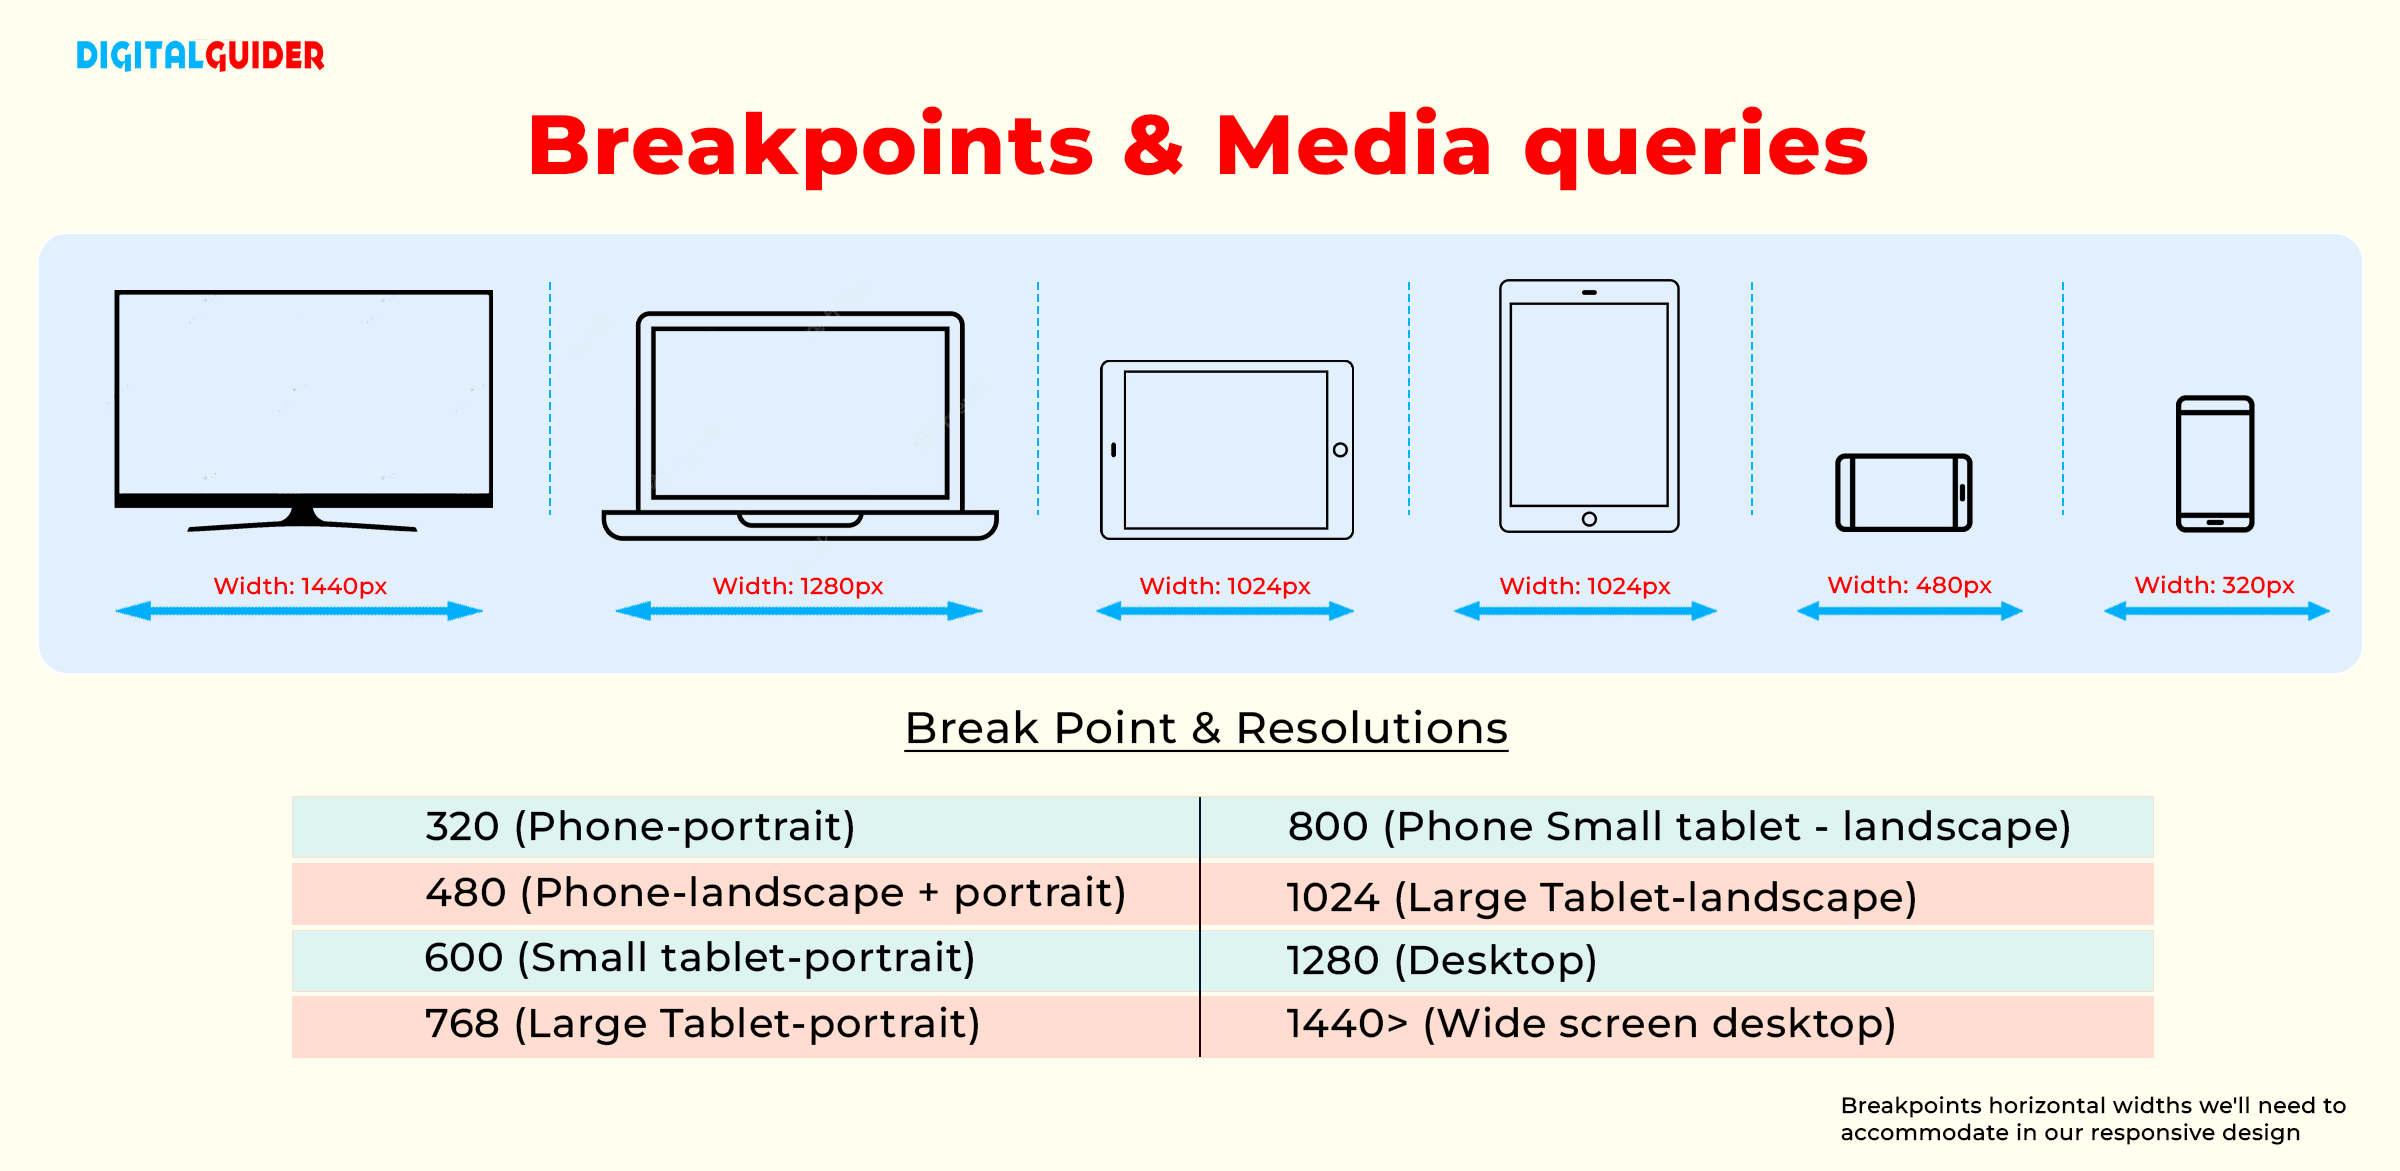 breakpoints & media query